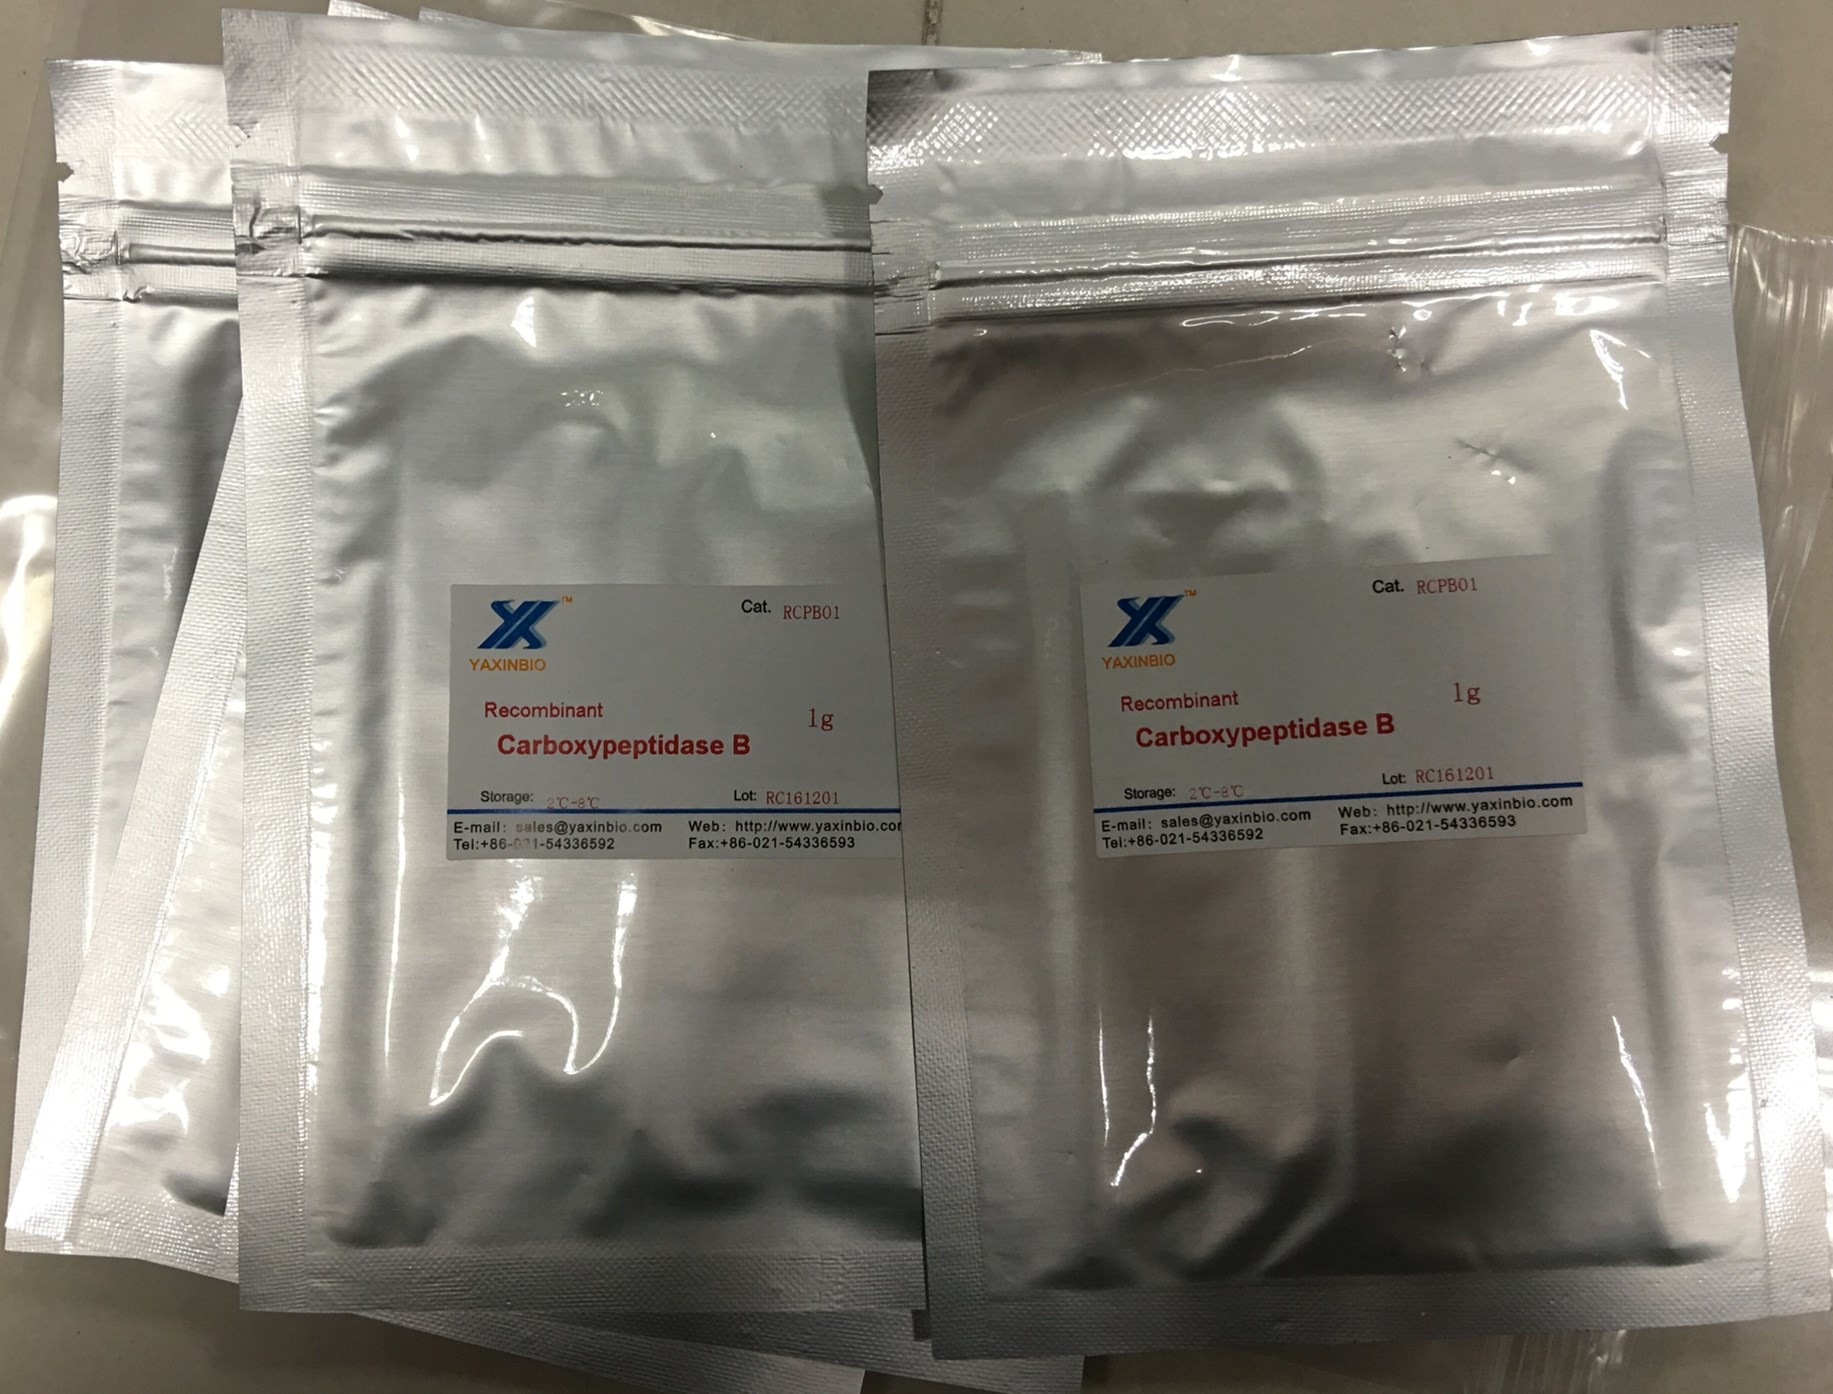 Quality Recombinant Carboxypeptidase B, Specific Activity ≥170 Units/Mg Pro., Lyophilized Powder for sale